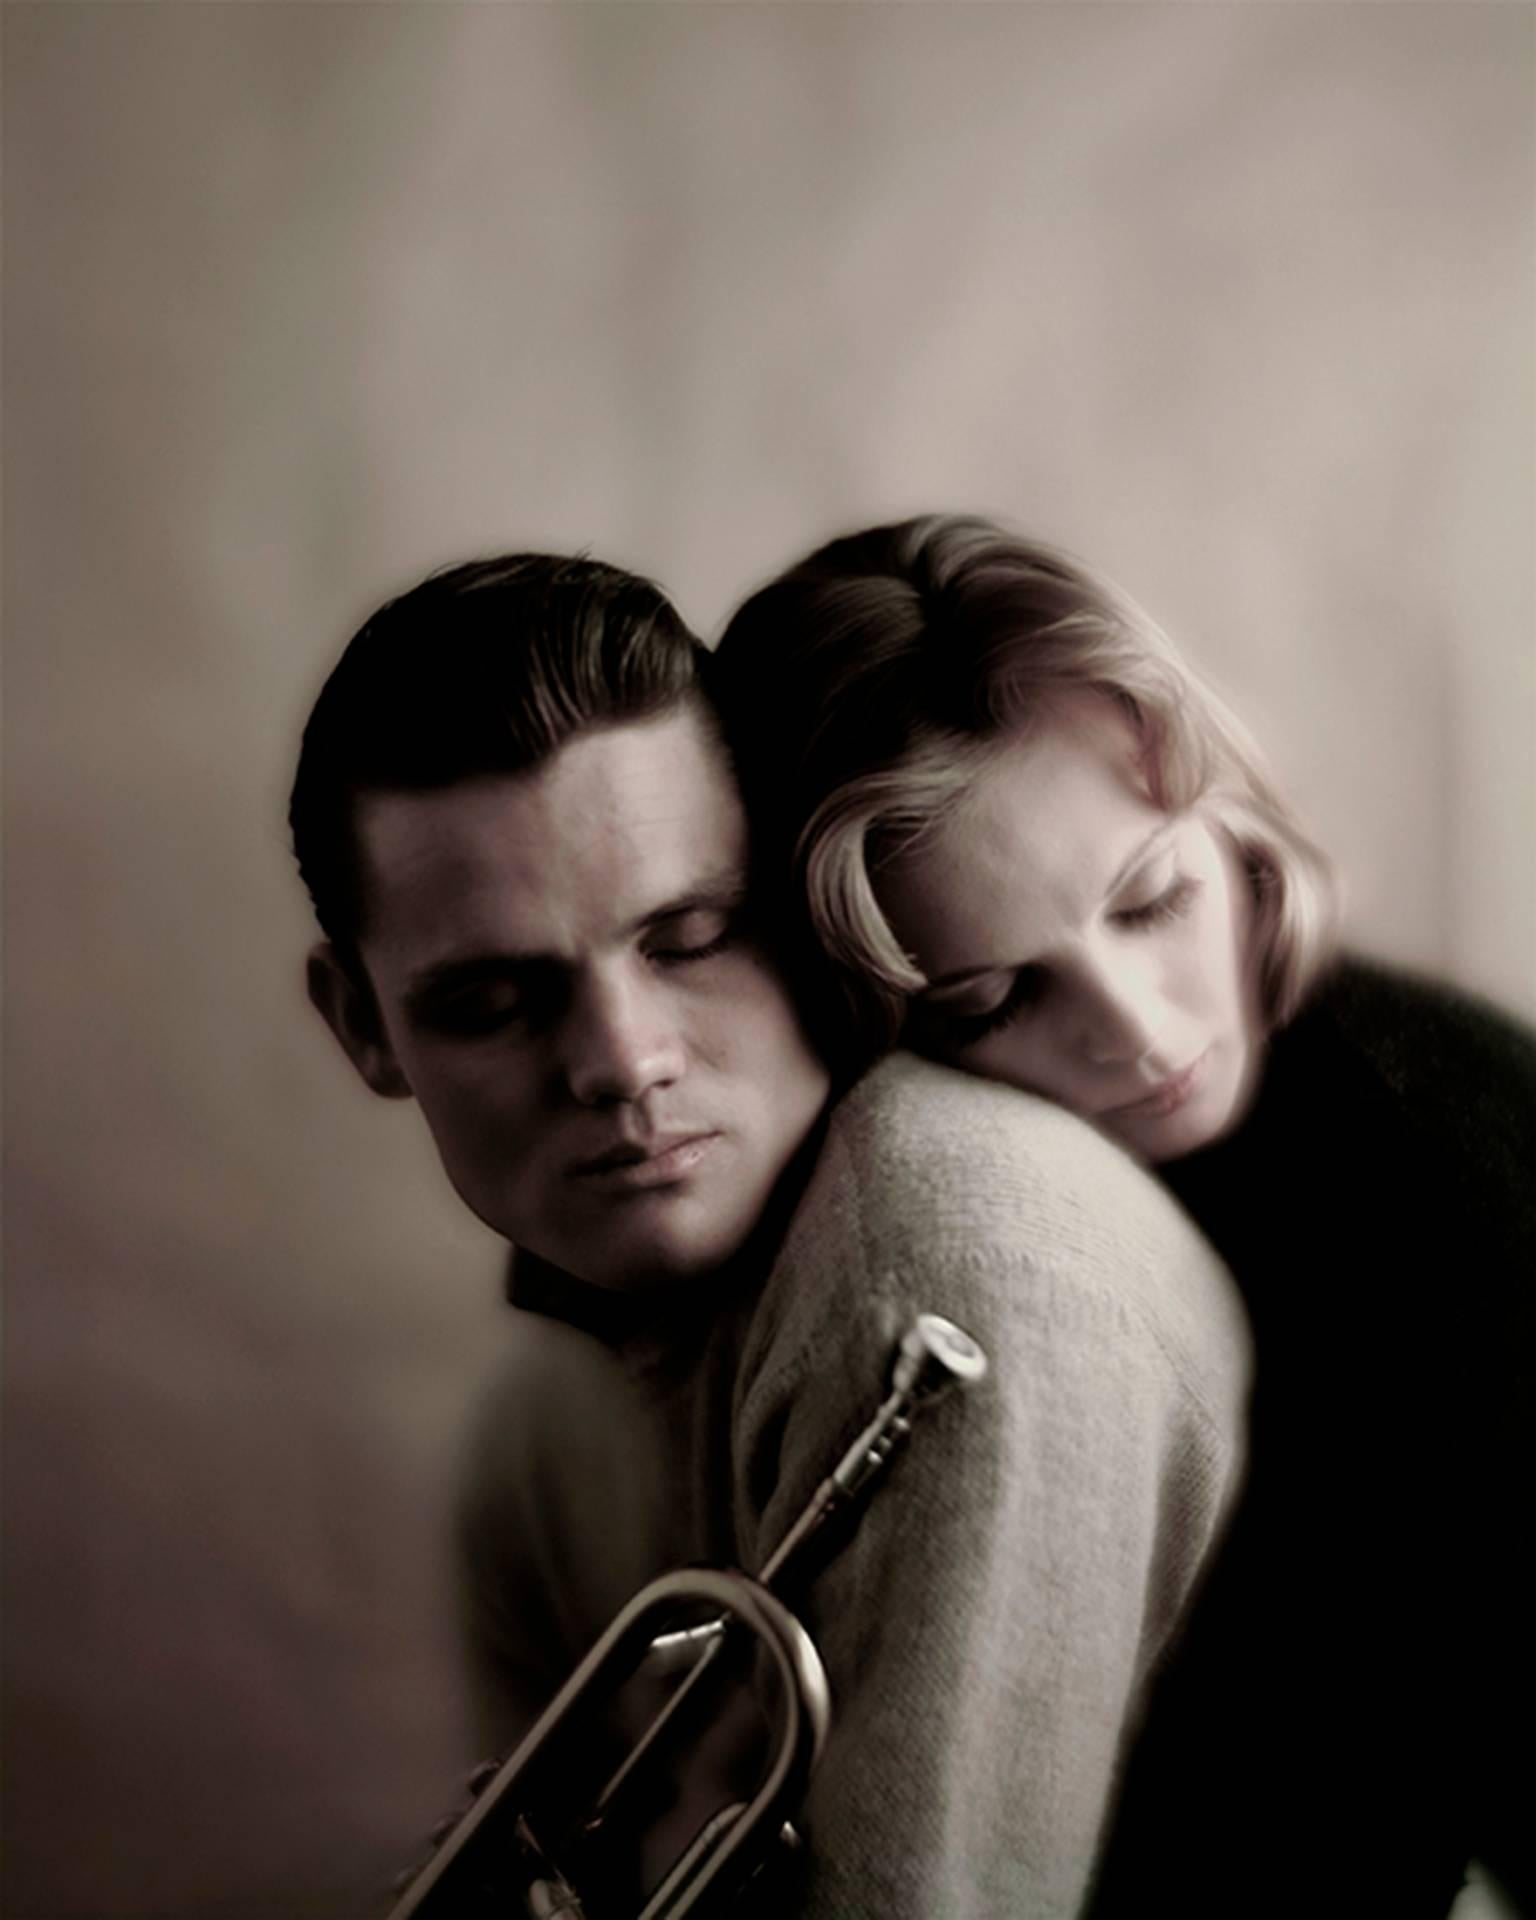 Melvin Sokolsky Portrait Photograph - Chet Baker and Wally Coover 